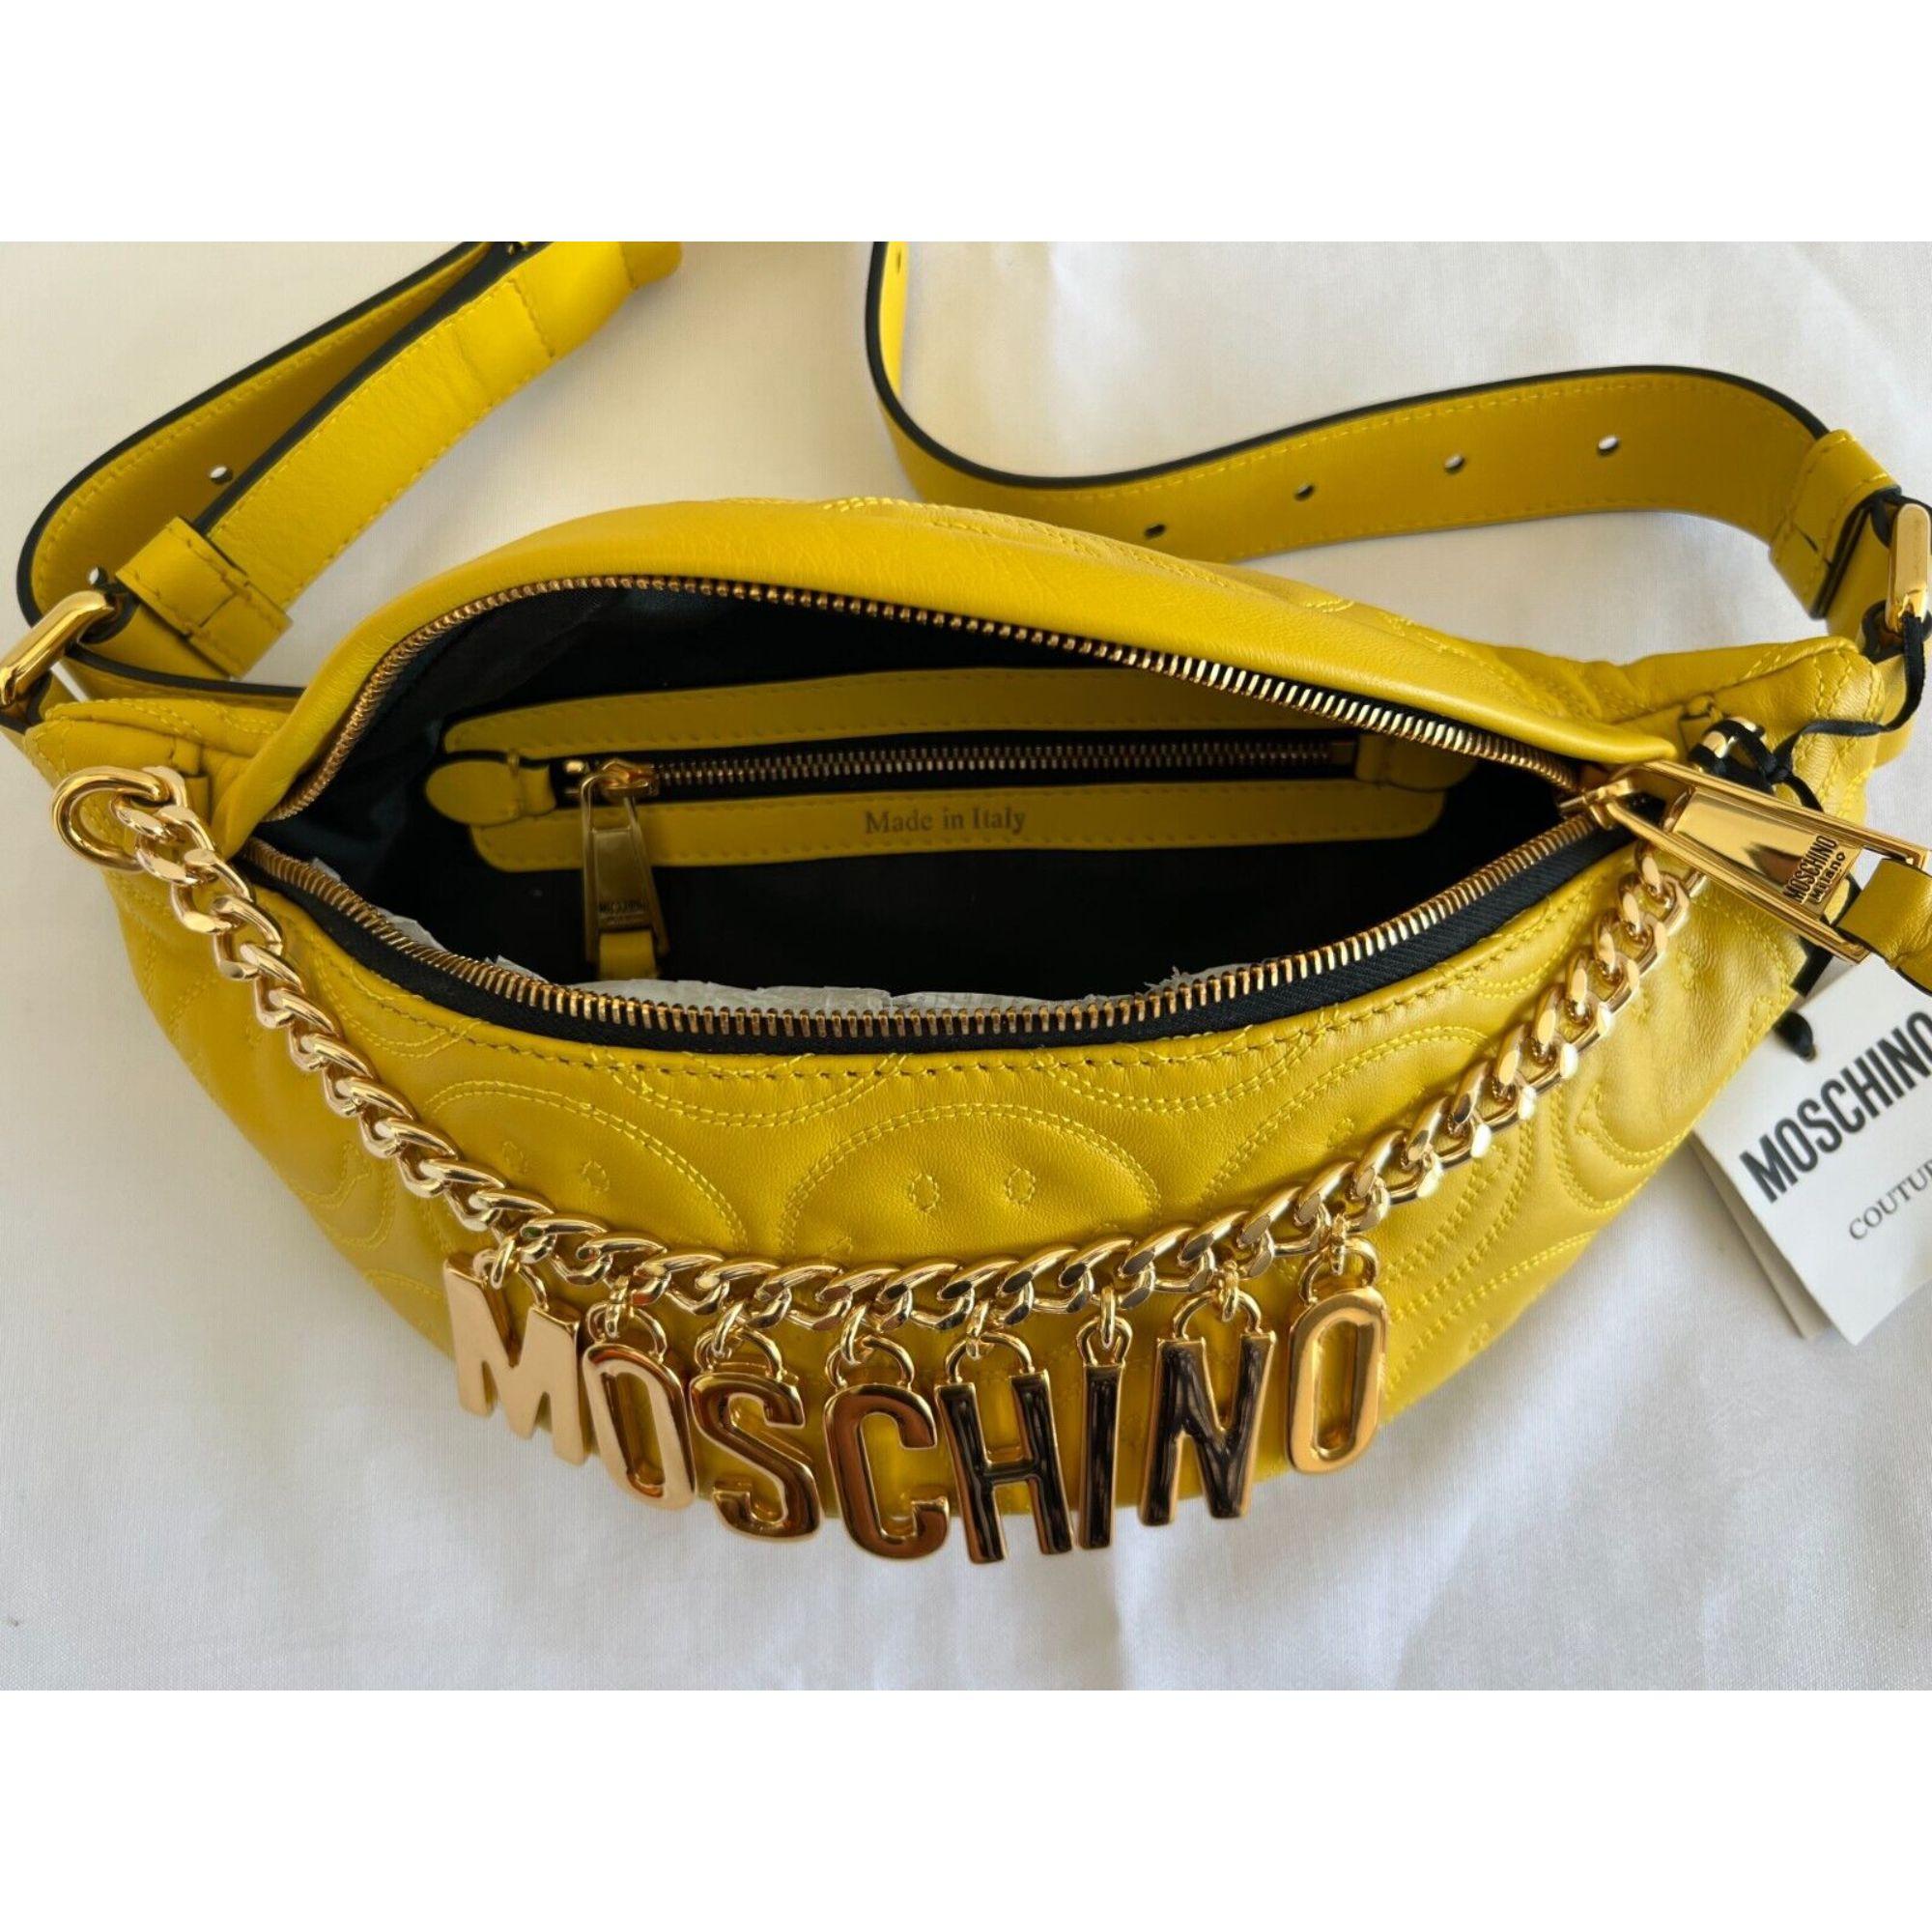 SS21 Moschino Couture Yellow Fanny Pack with Engraved Smiley by Jeremy Scott For Sale 9